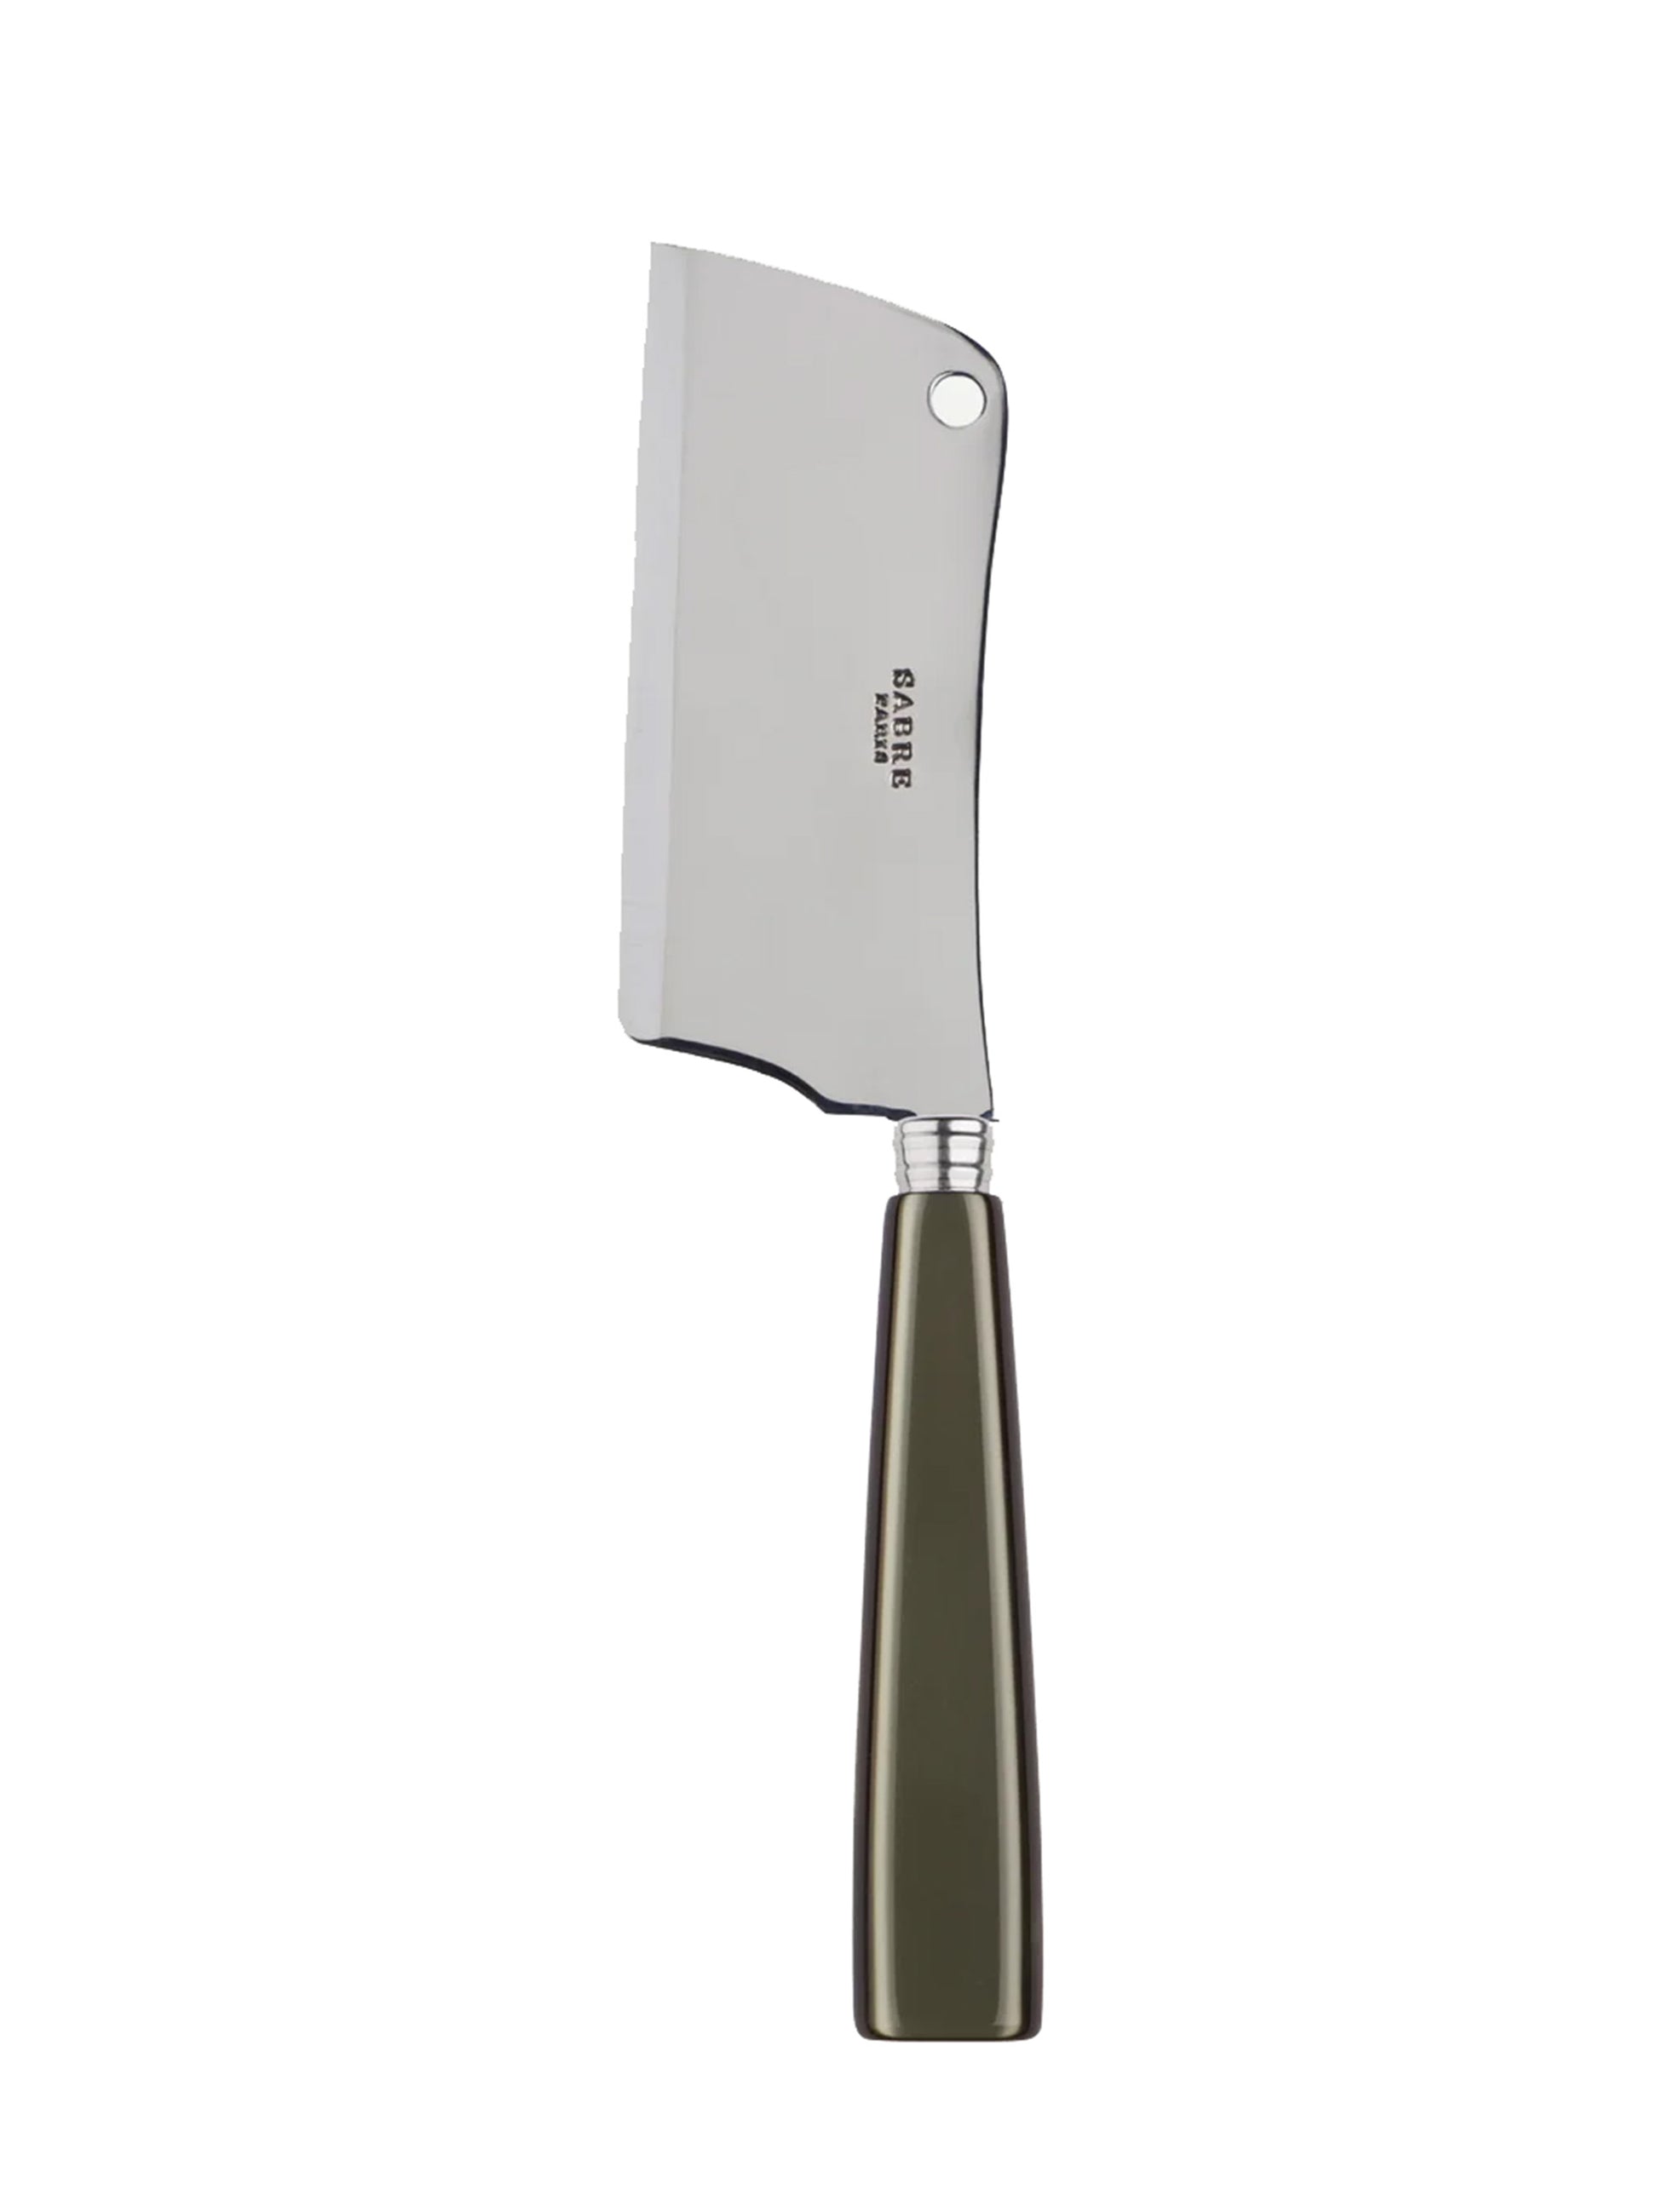 Sabre Paris Icone Olive Cheese Cleaver Weston Table